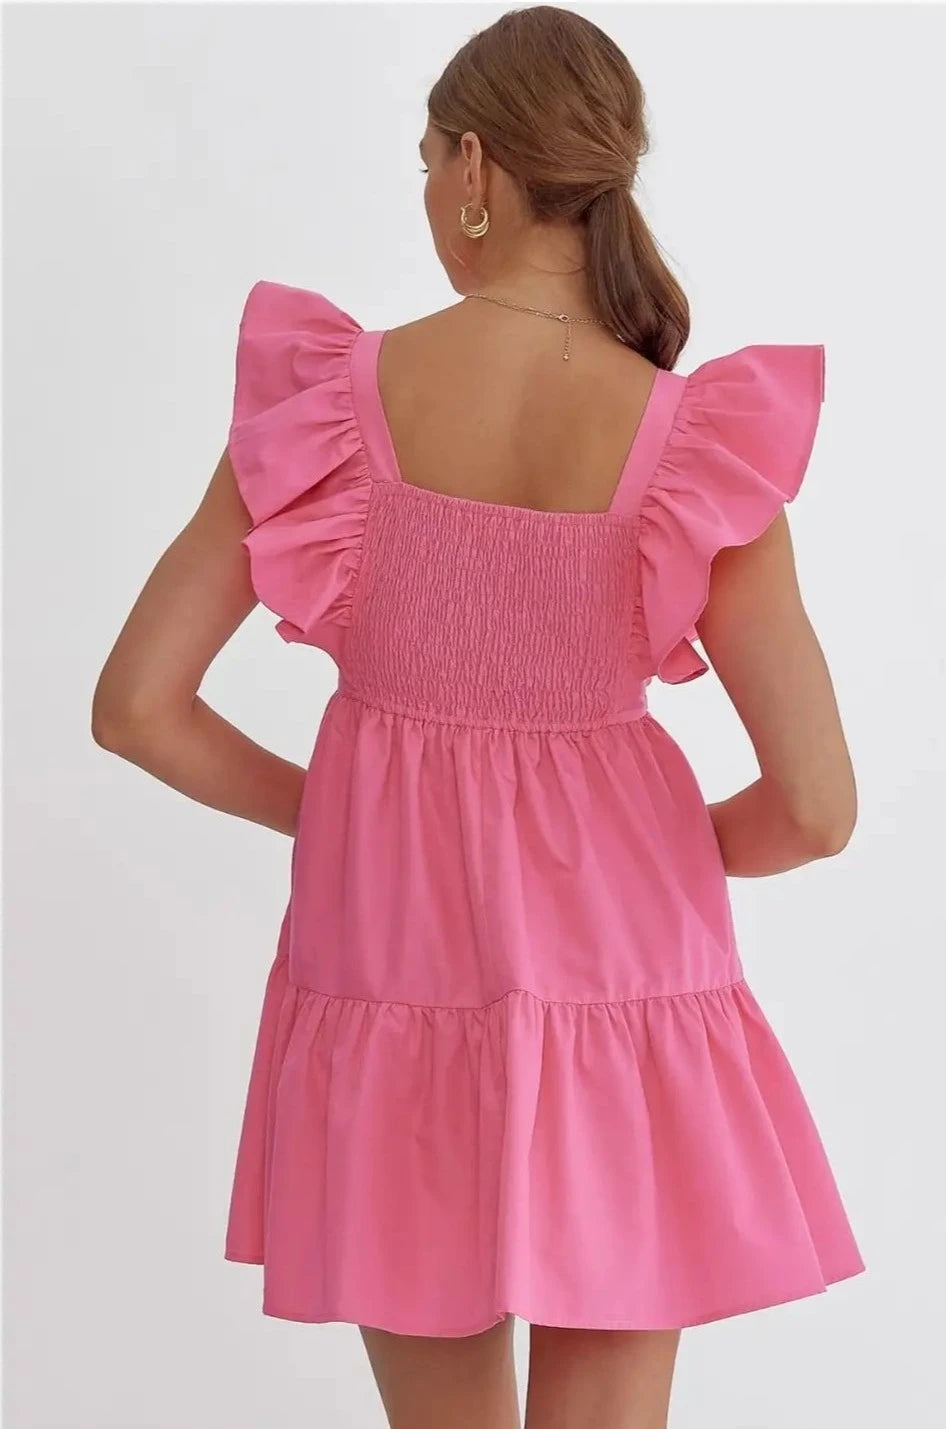 Solid Square Neck Baby Doll Dress